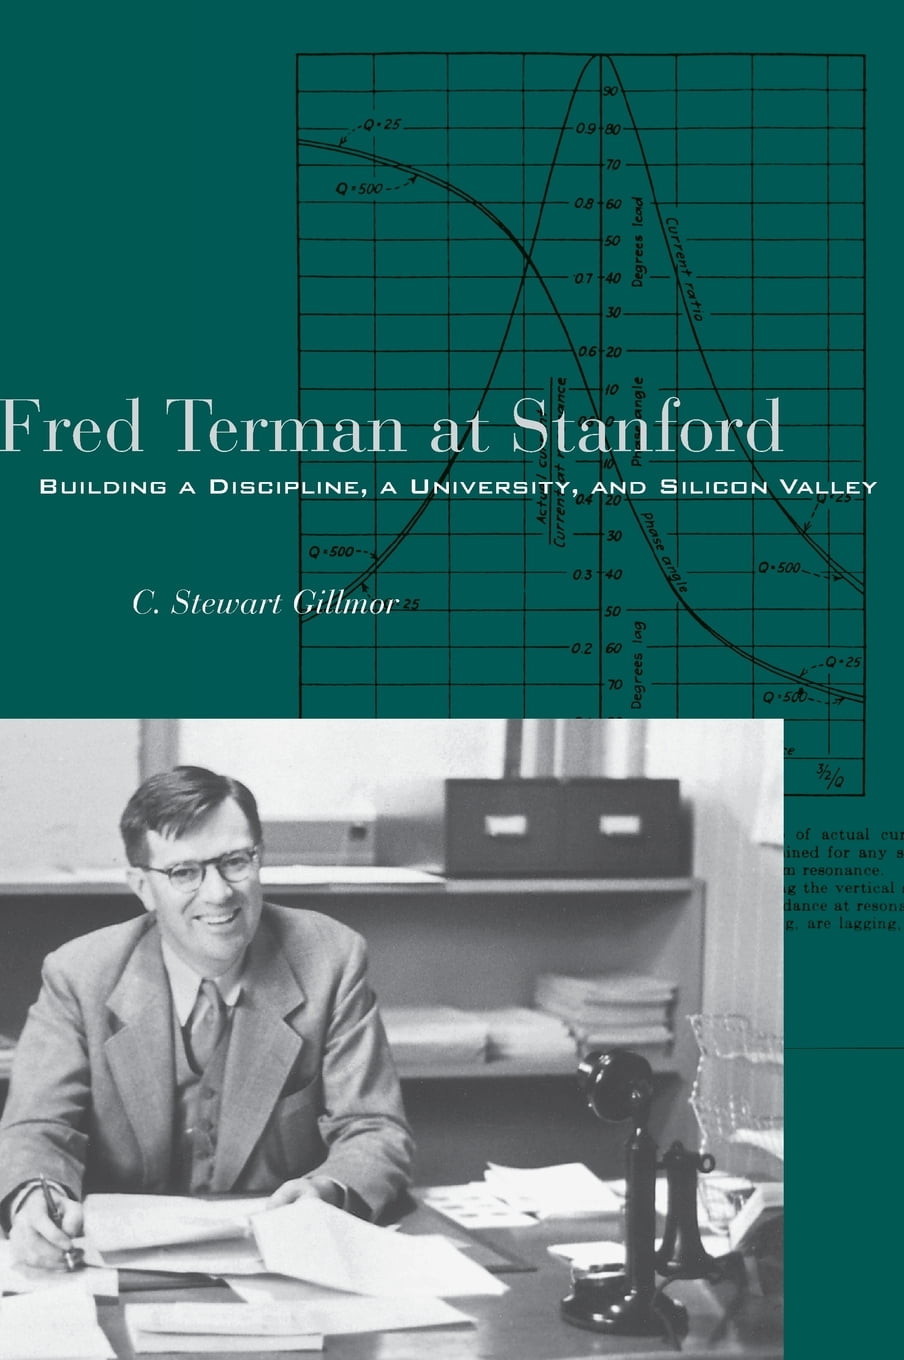 Fred-Terman-at-Stanford-Building-a-Discipline-a-University-and-Silicon-Valley